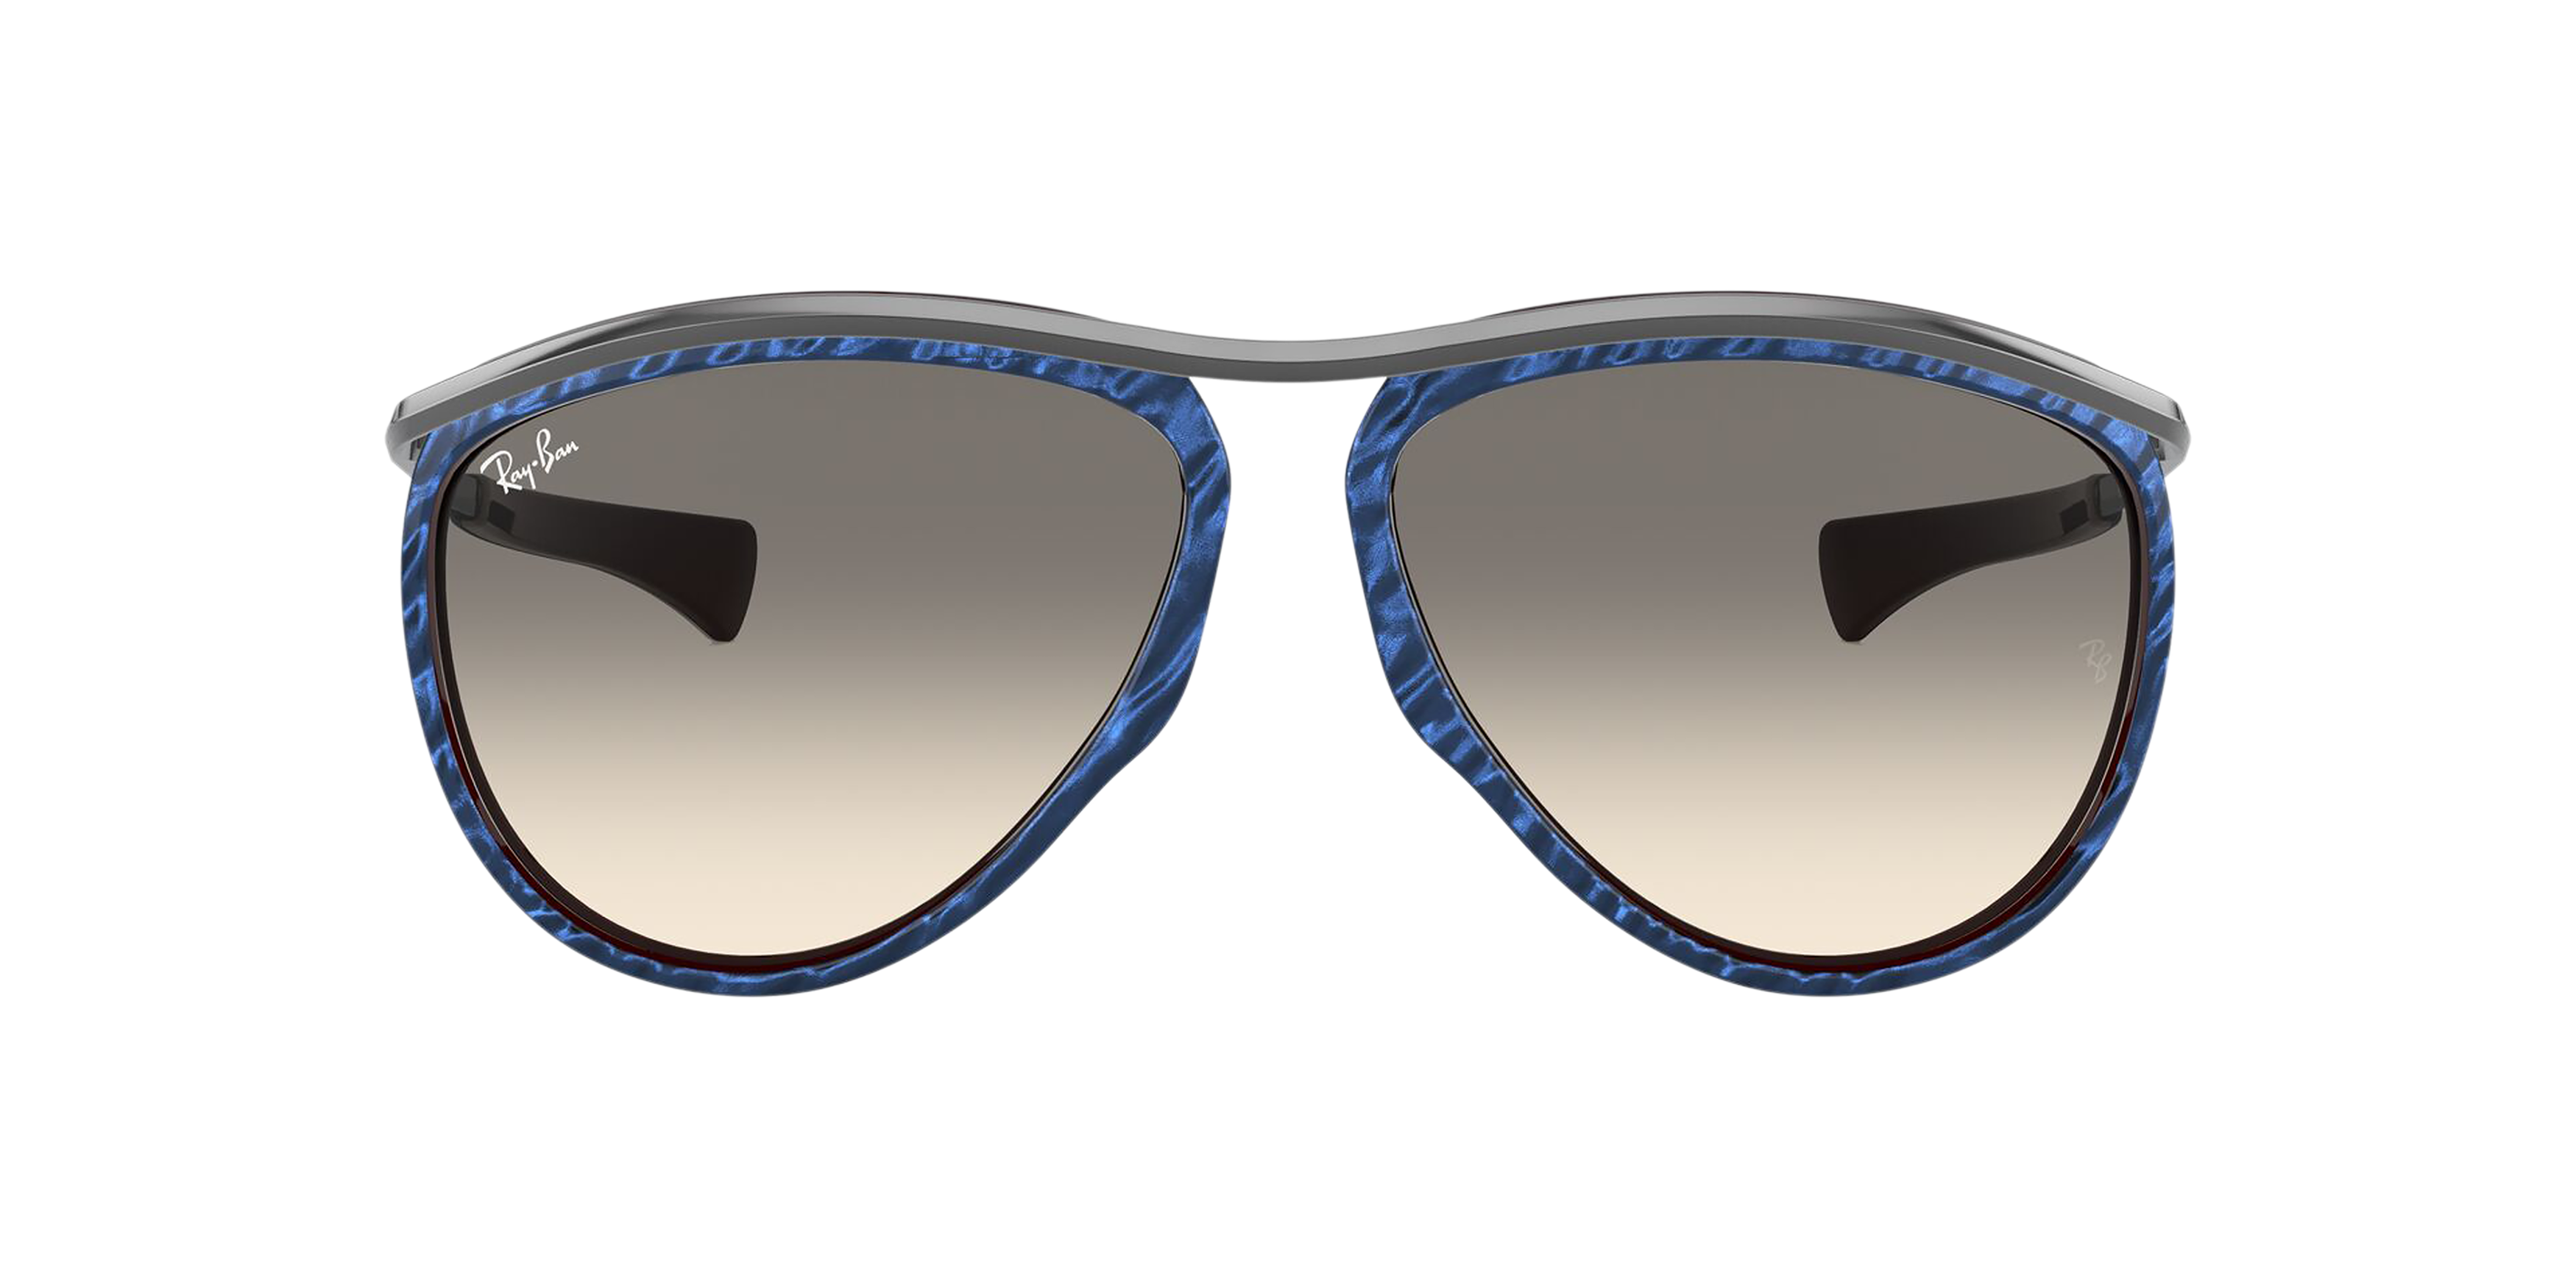 [products.image.front] Ray-Ban Olympian Aviator RB2219 131032